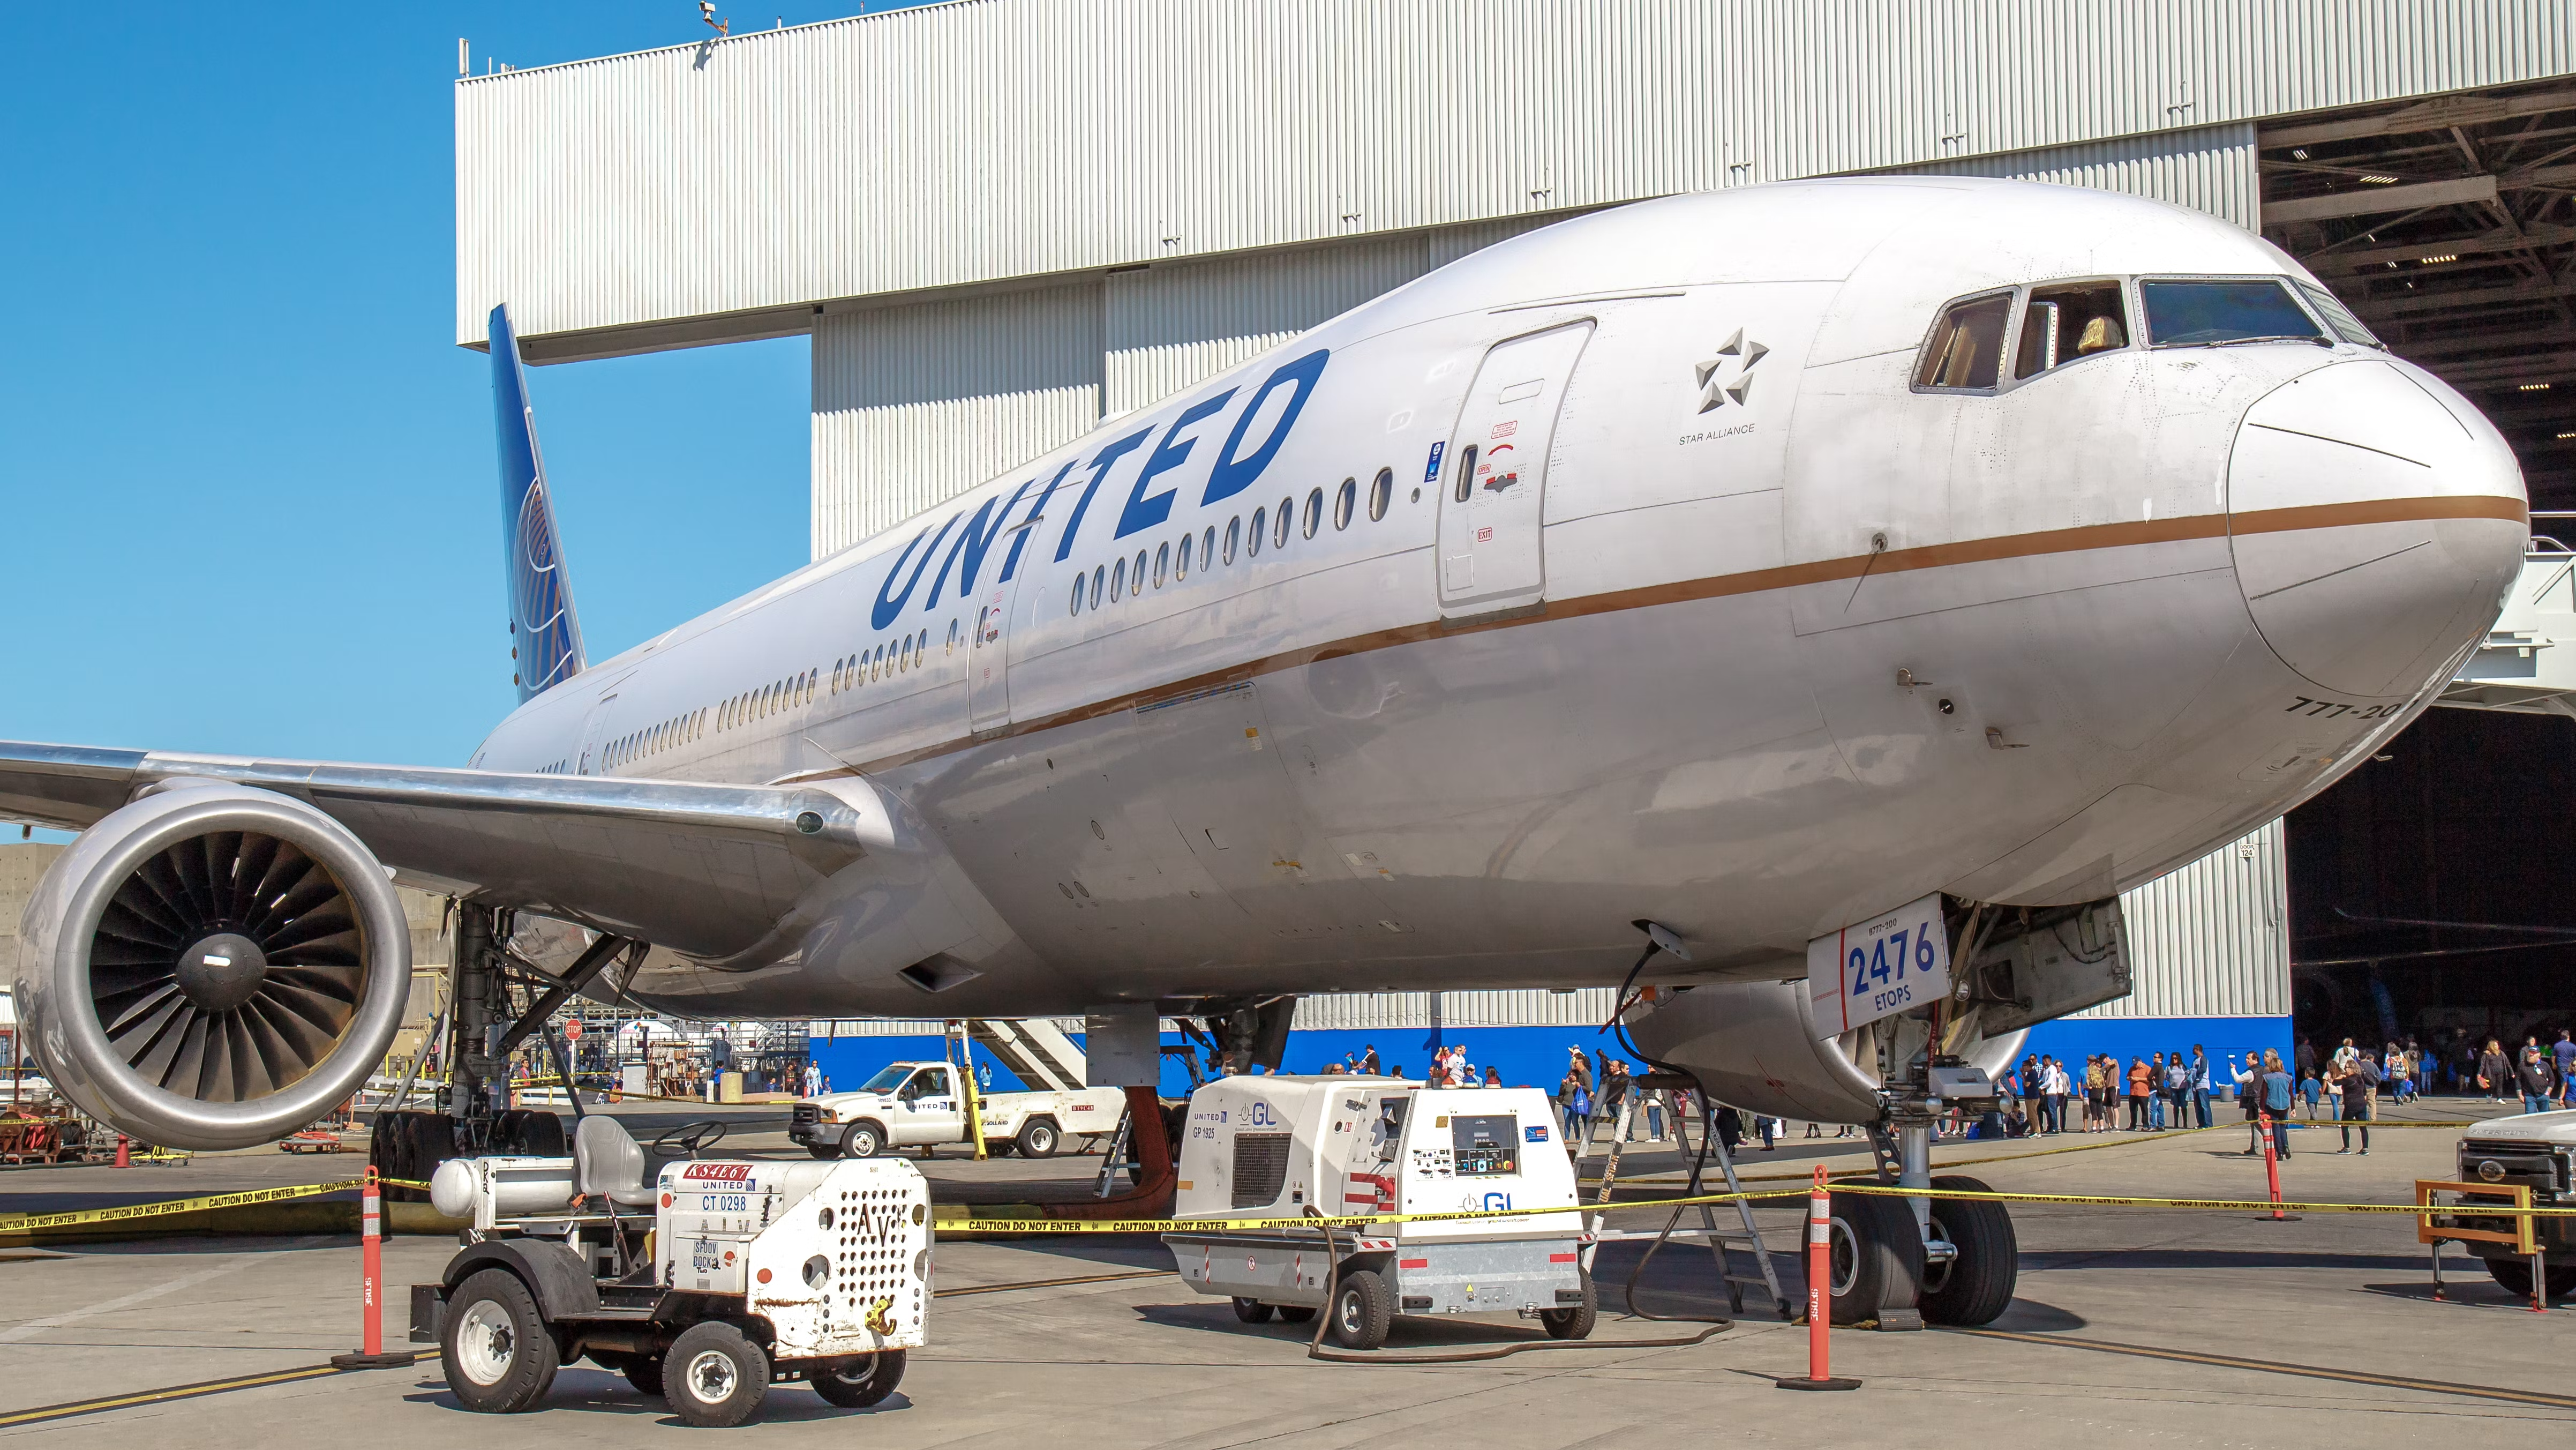 United Boeing 777 during maintenance check